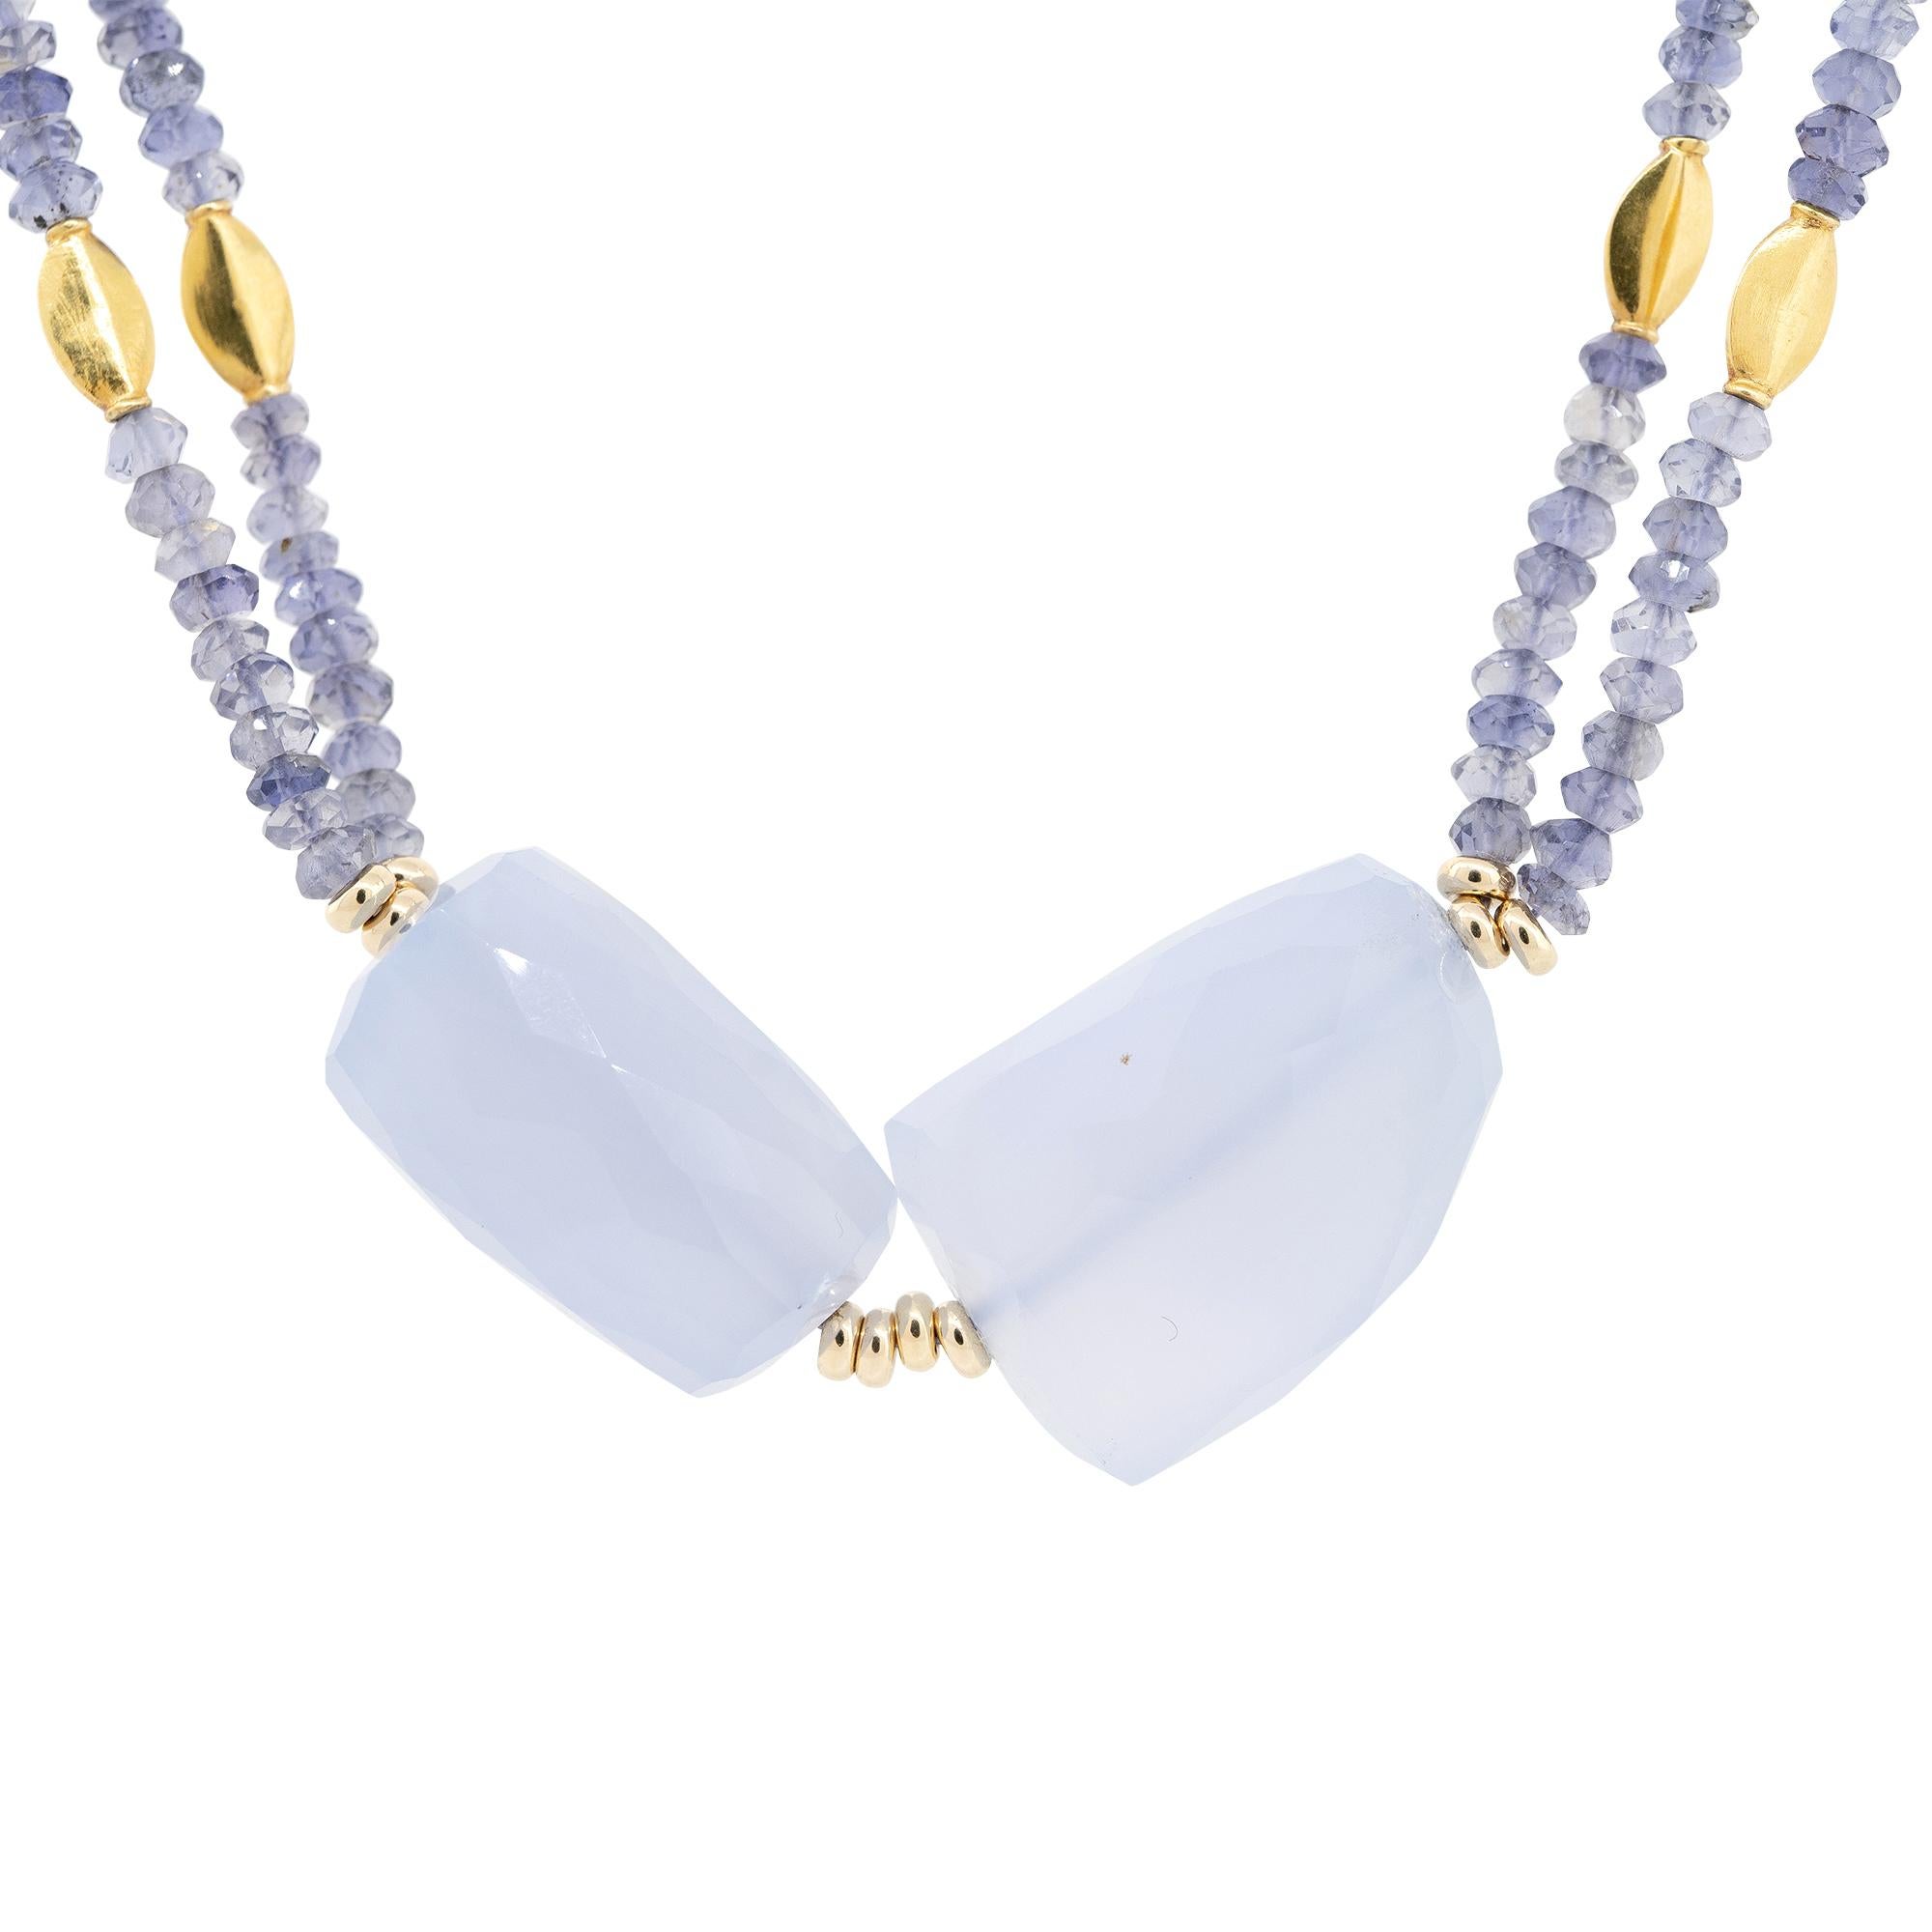 18k Yellow Gold Beaded Chalcedony Necklace
Material: 18k Yellow Gold and Chalcedony
Total Weight: 62.7g (40.3dwt)
Length: 18.5